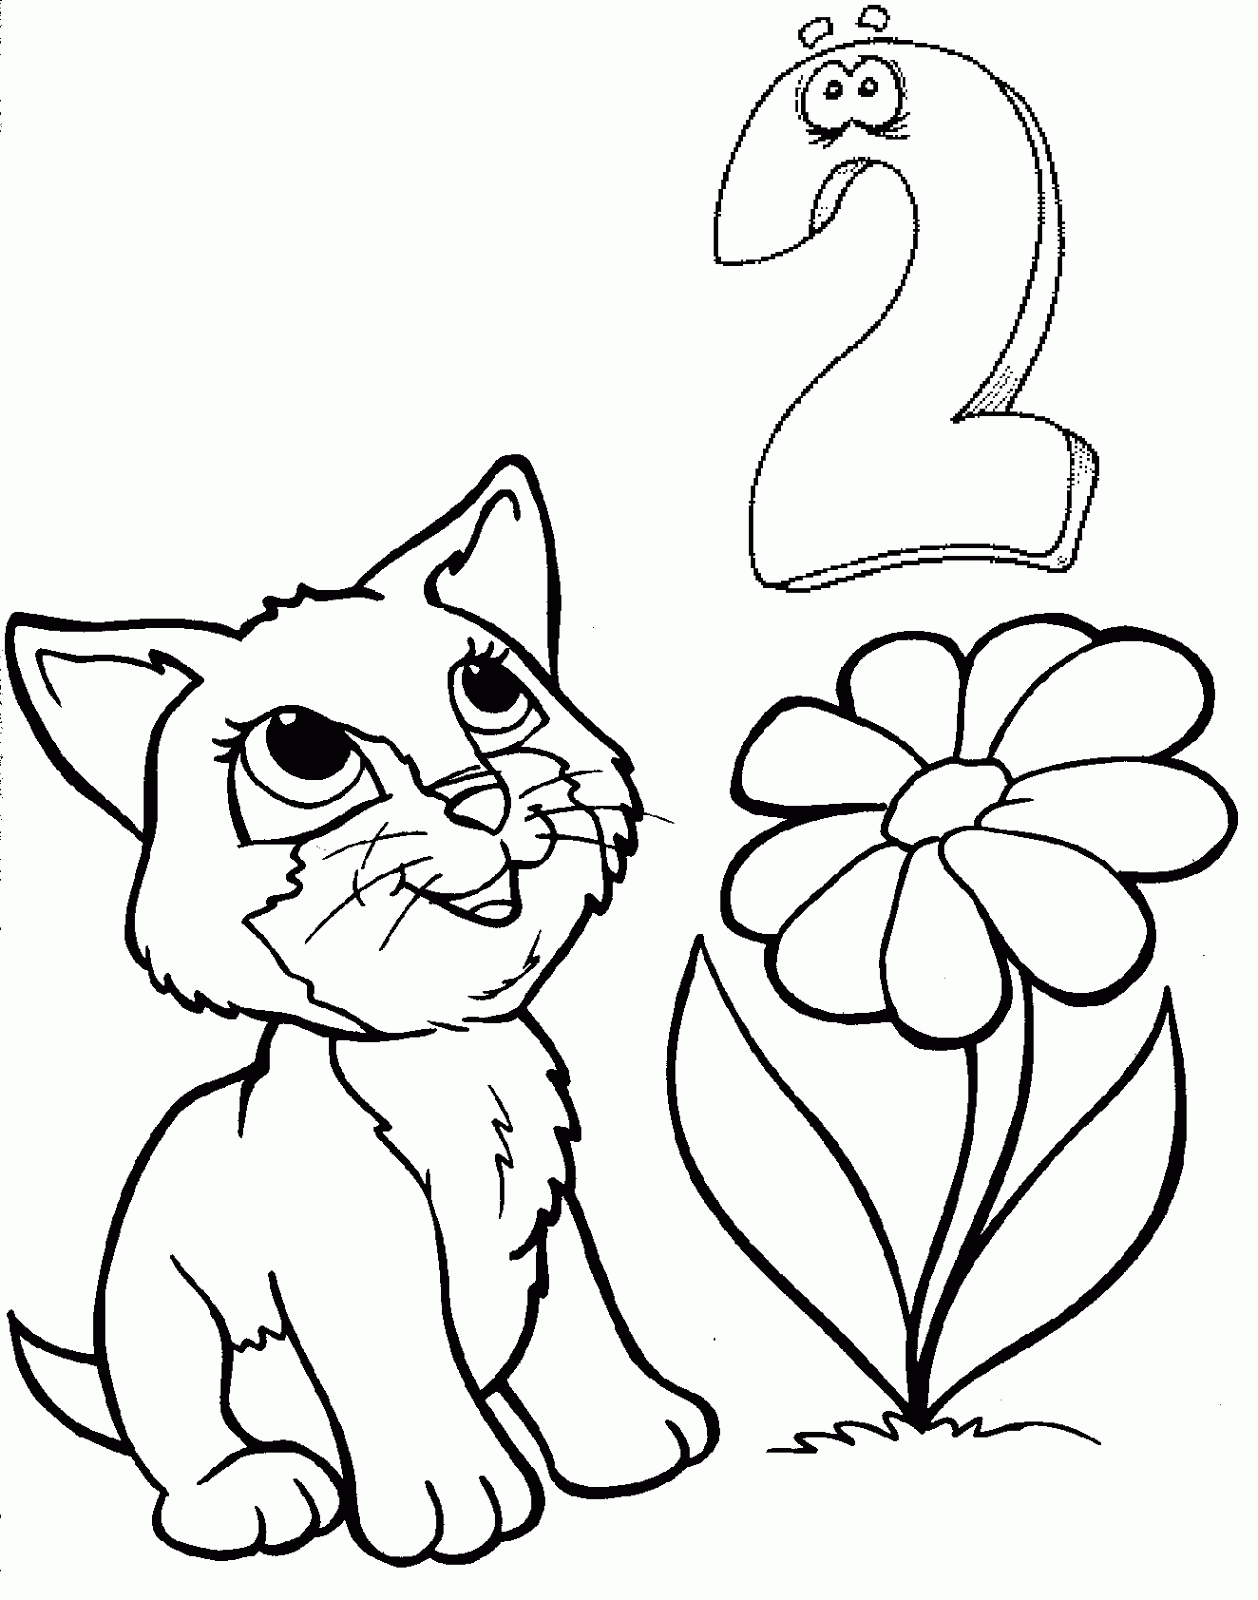 Coloring page: Numbers (Educational) #125354 - Printable coloring pages